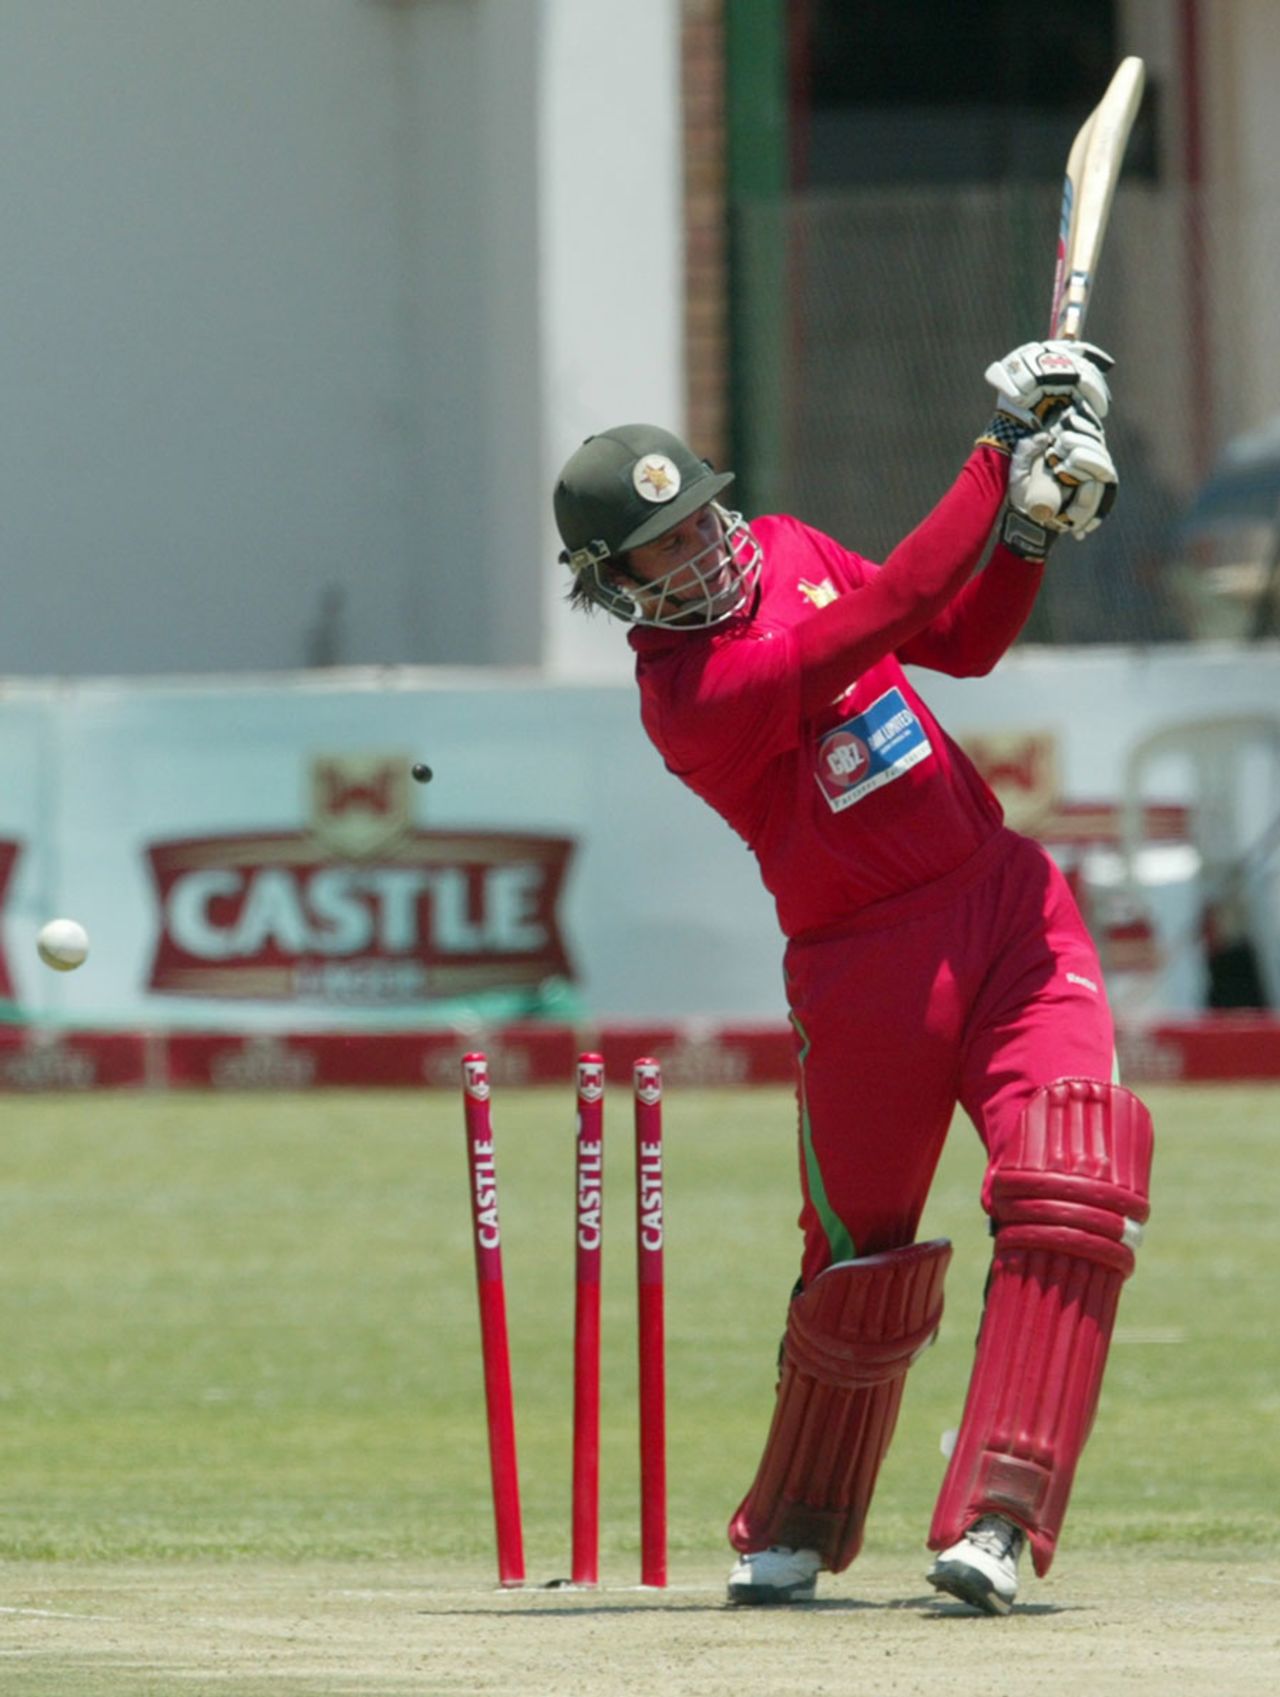 Malcolm Waller was bowled after a quick 42, Zimbabwe v New Zealand, 2nd ODI, Harare, October 22, 2011 